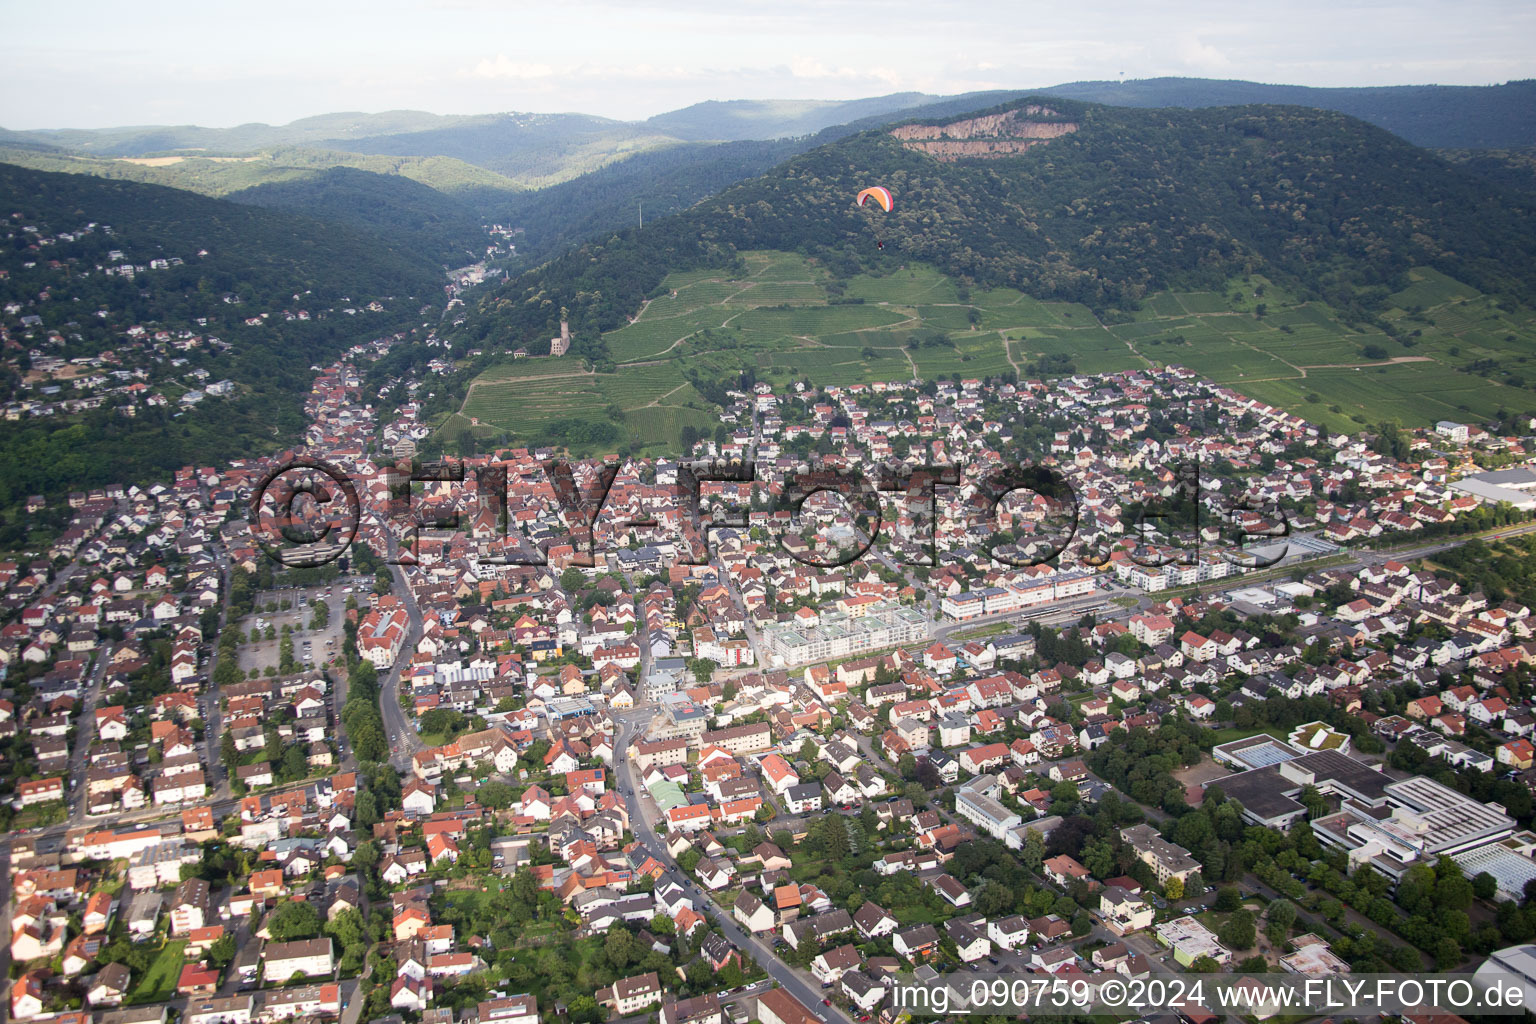 Schriesheim in the state Baden-Wuerttemberg, Germany seen from above